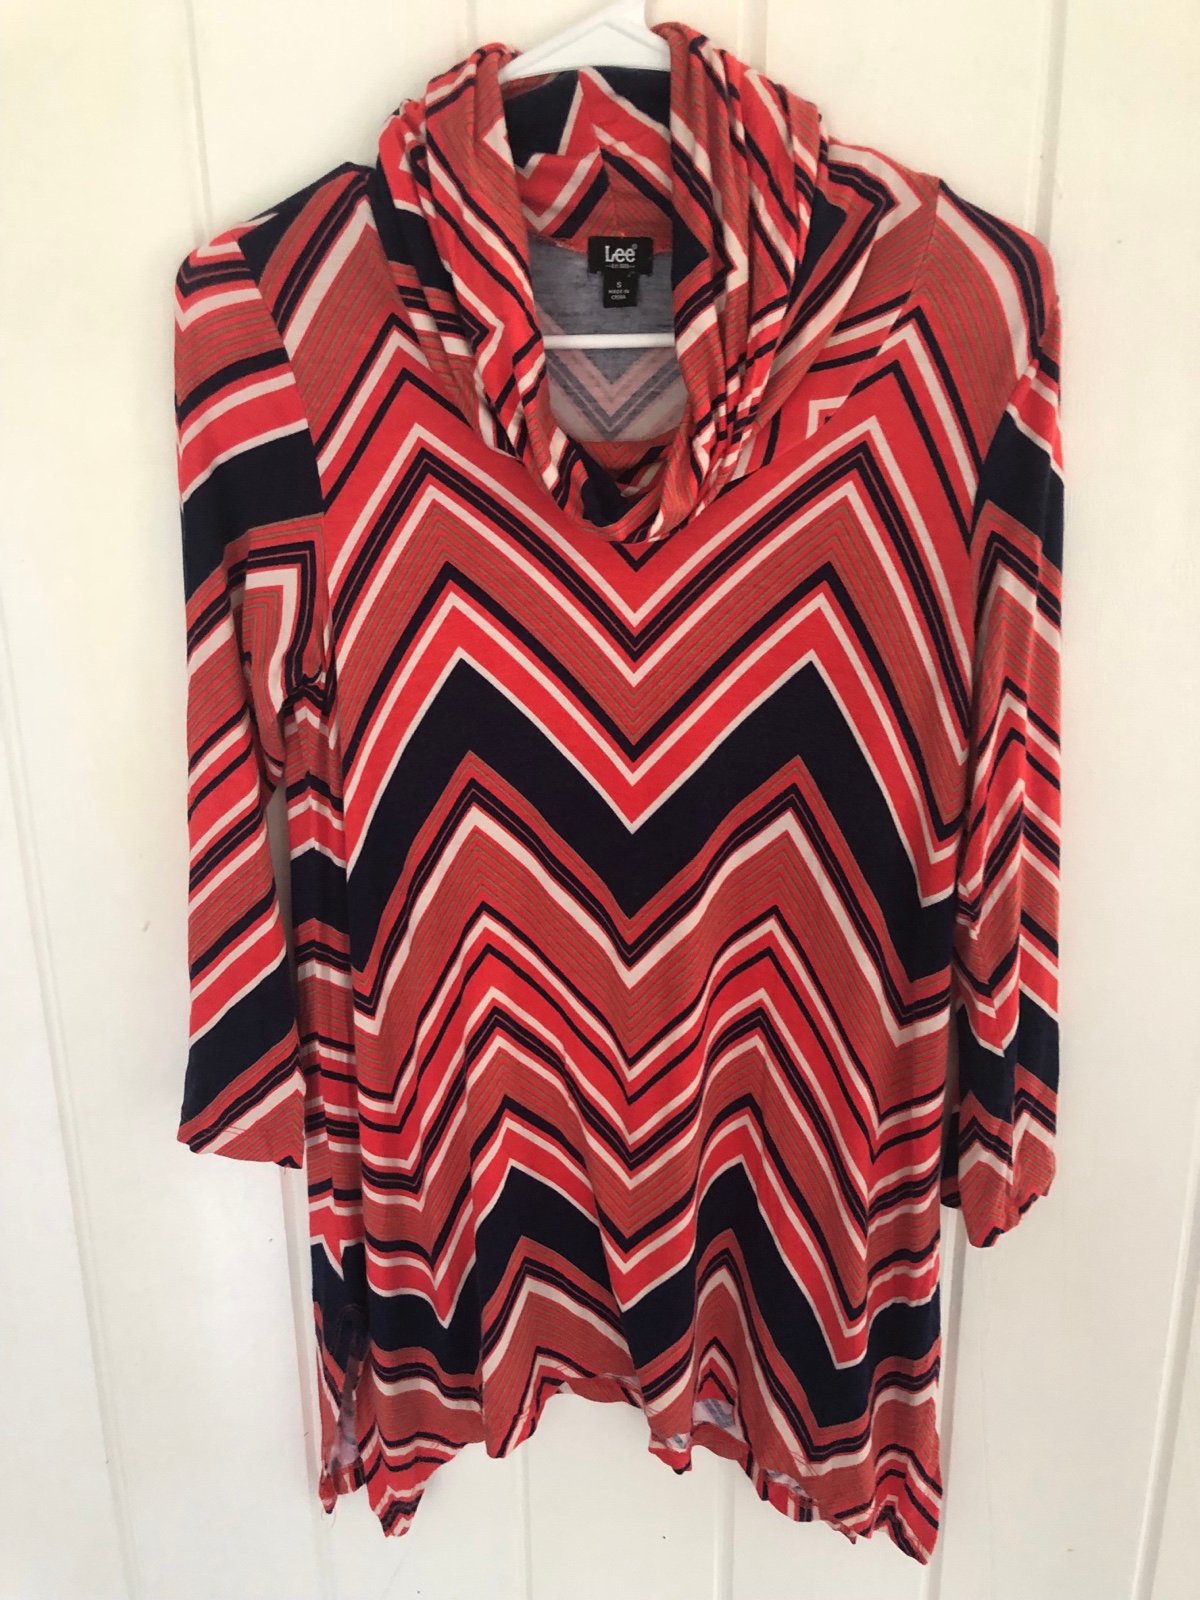 High quality Cowl neck 3/4 length sleeve tunic top size